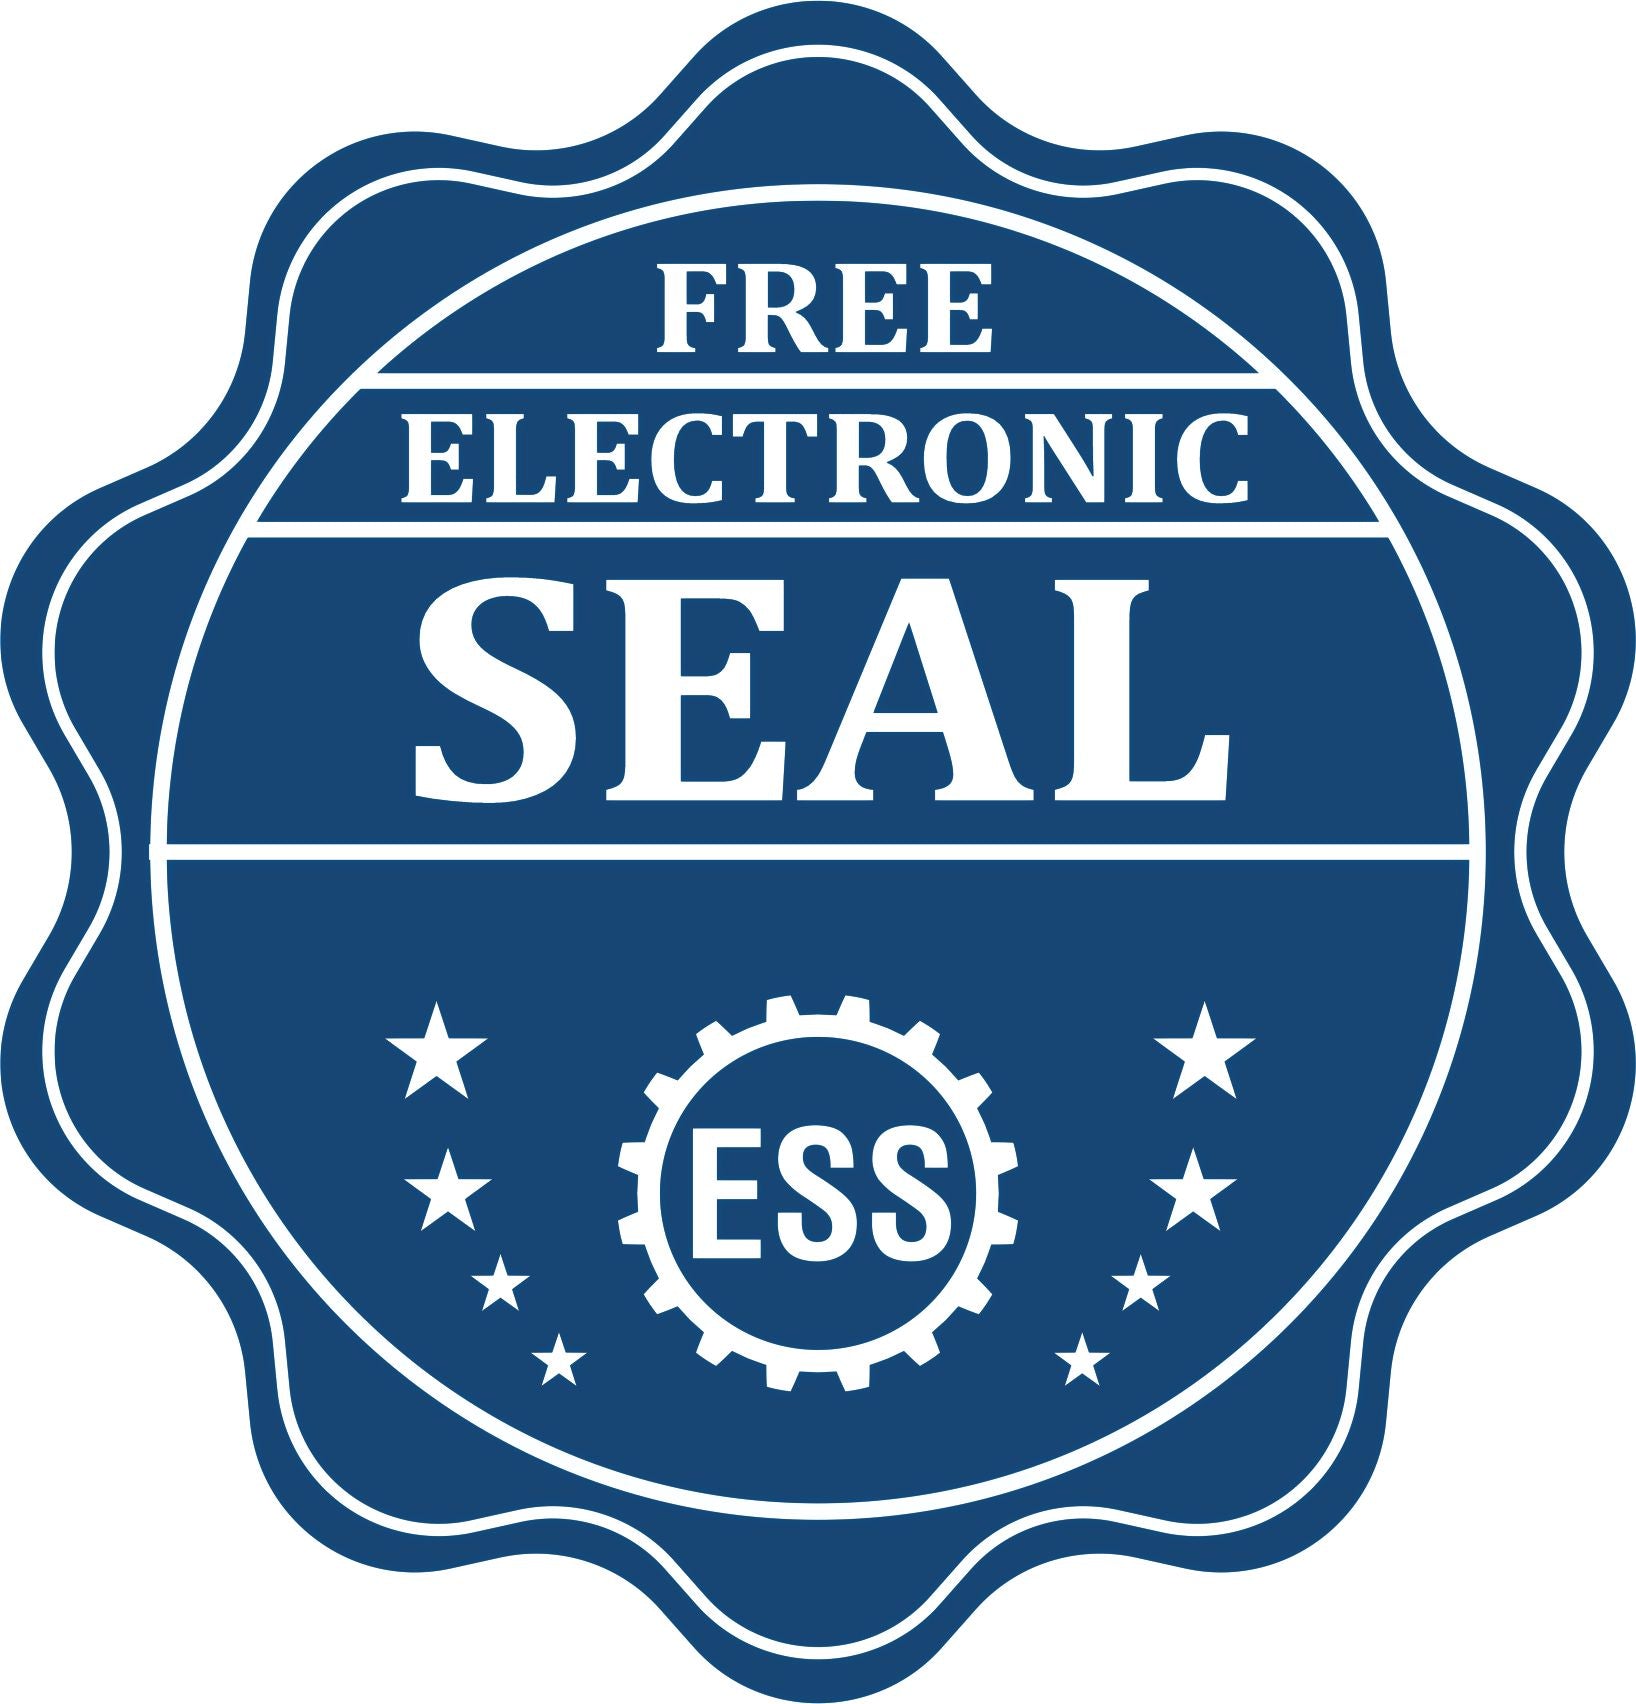 A badge showing a free electronic seal for the Connecticut Desk Landscape Architectural Seal Embosser with stars and the ESS gear on the emblem.